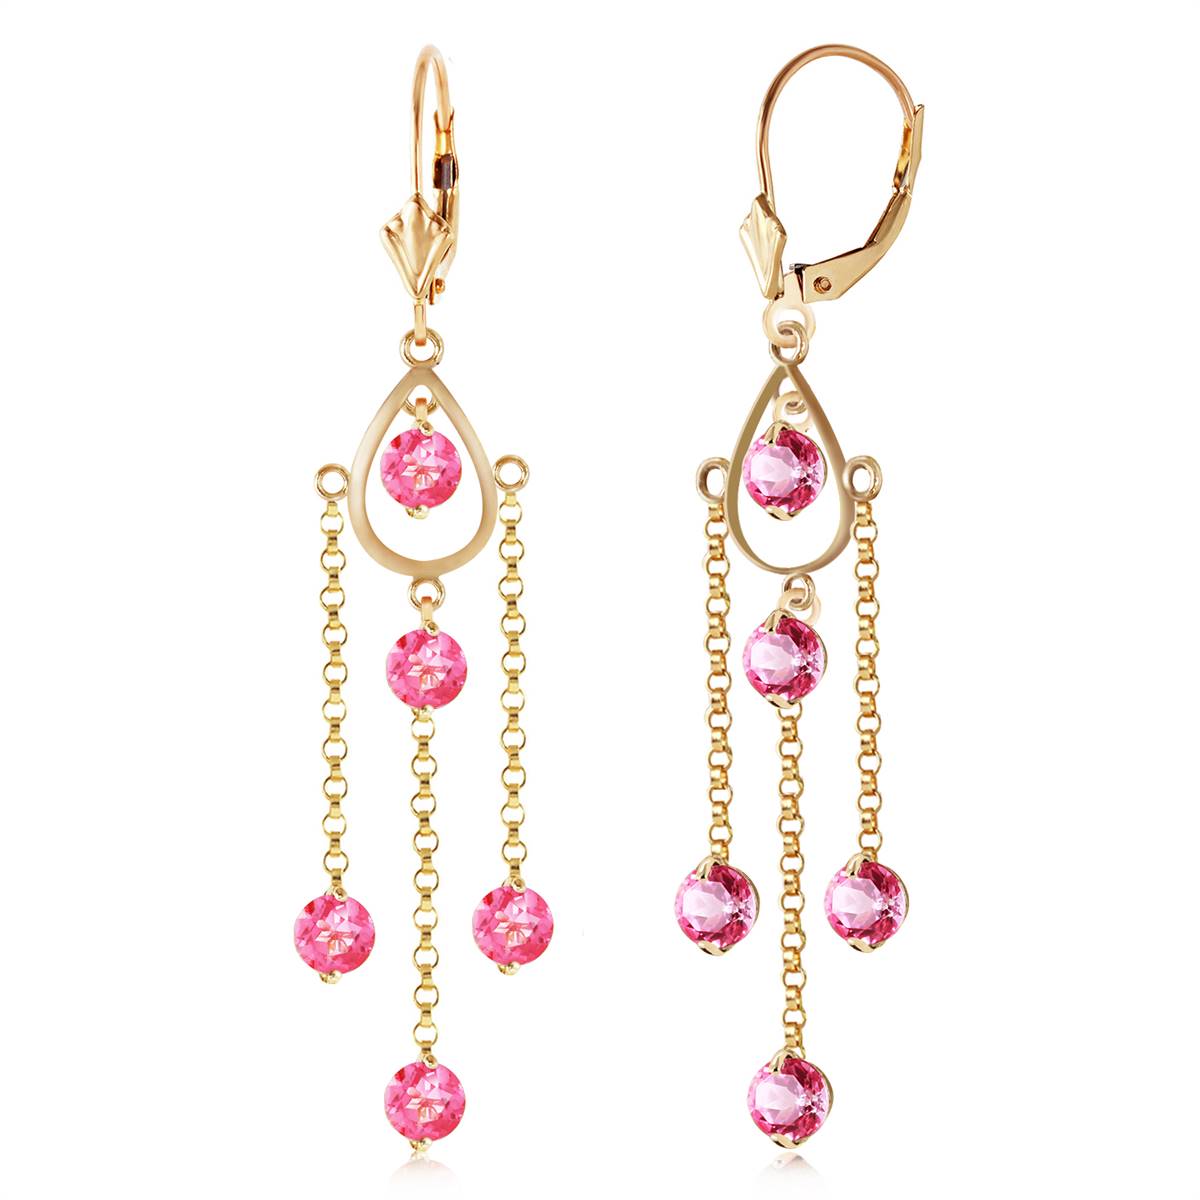 3 Carat 14K Solid Yellow Gold Gilded Age Pink Topaz Earrings